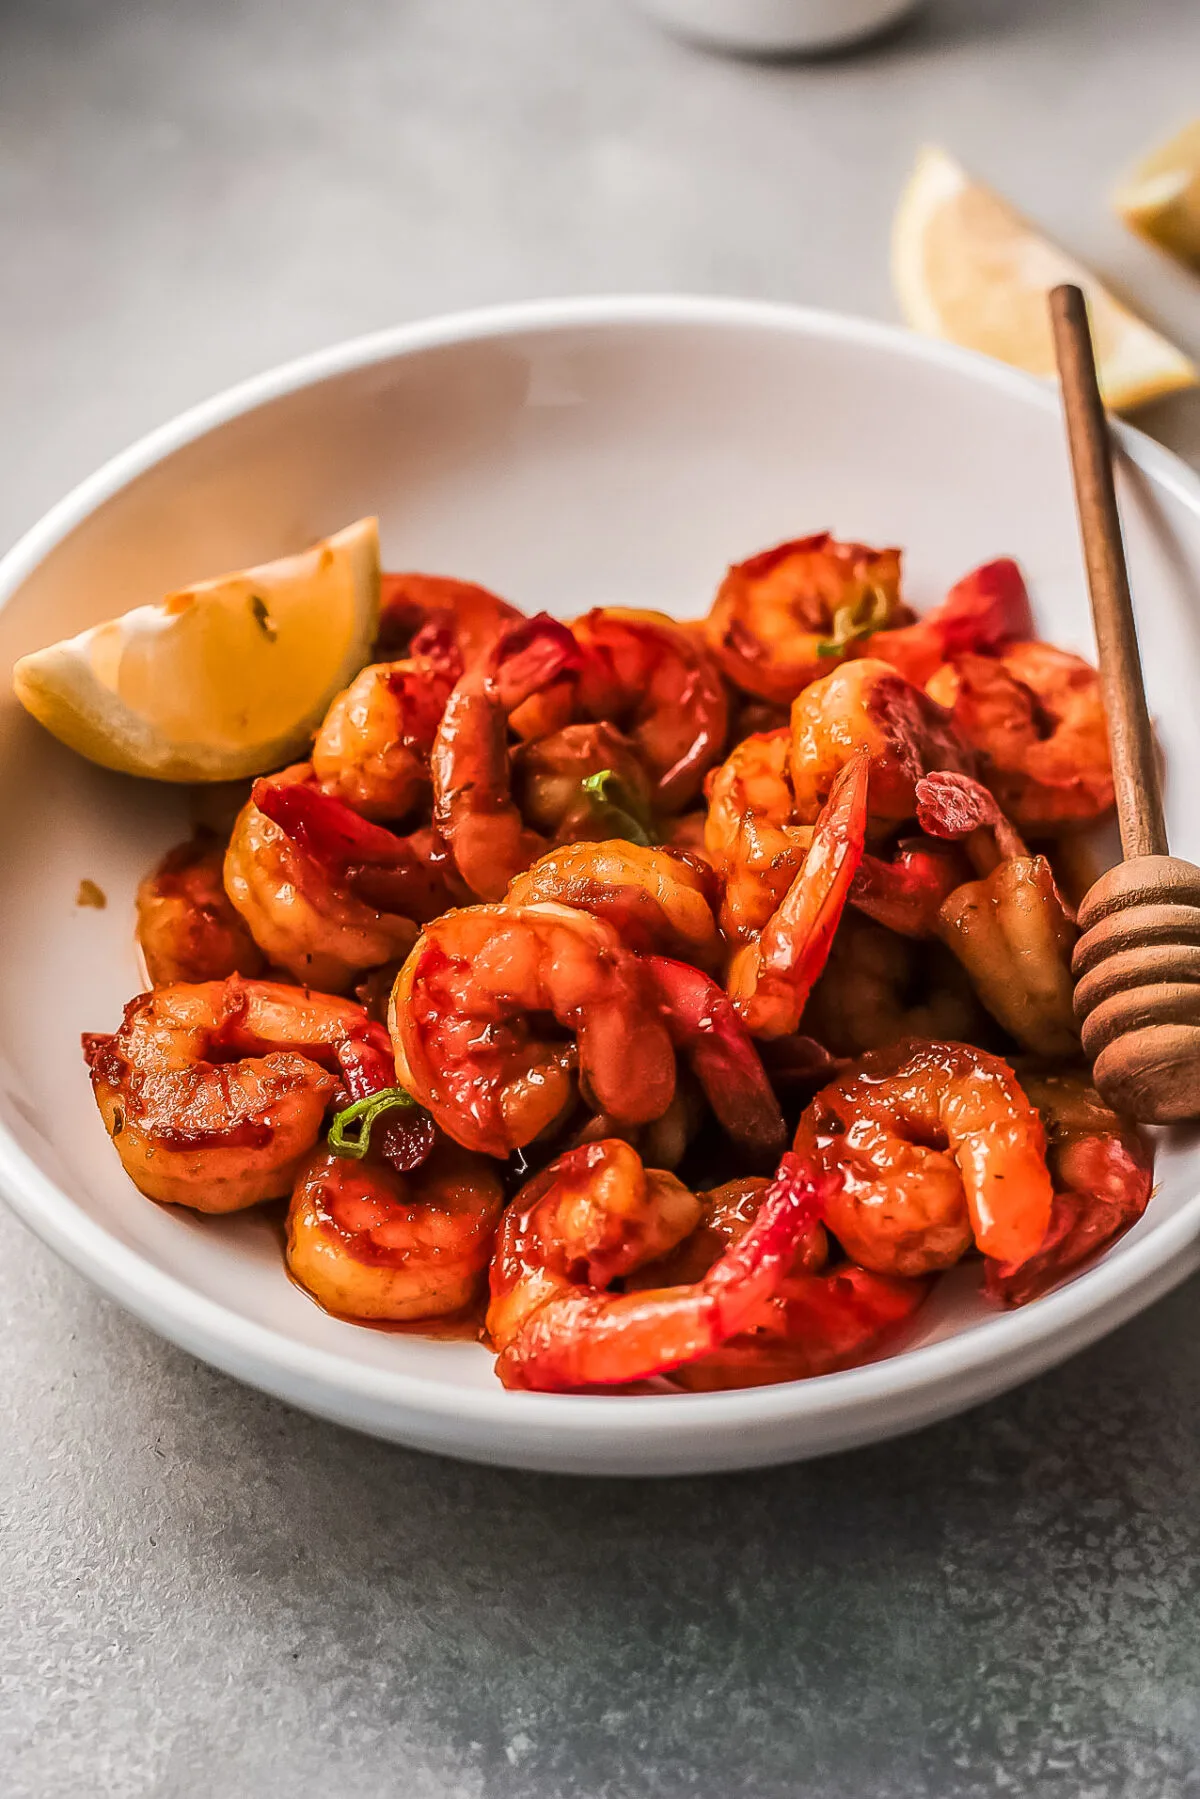 Amazingly flavorful and tender Honey Cajun Shrimp featuring a sweet & spicy sauce. This recipe is so easy to make you won't believe it.